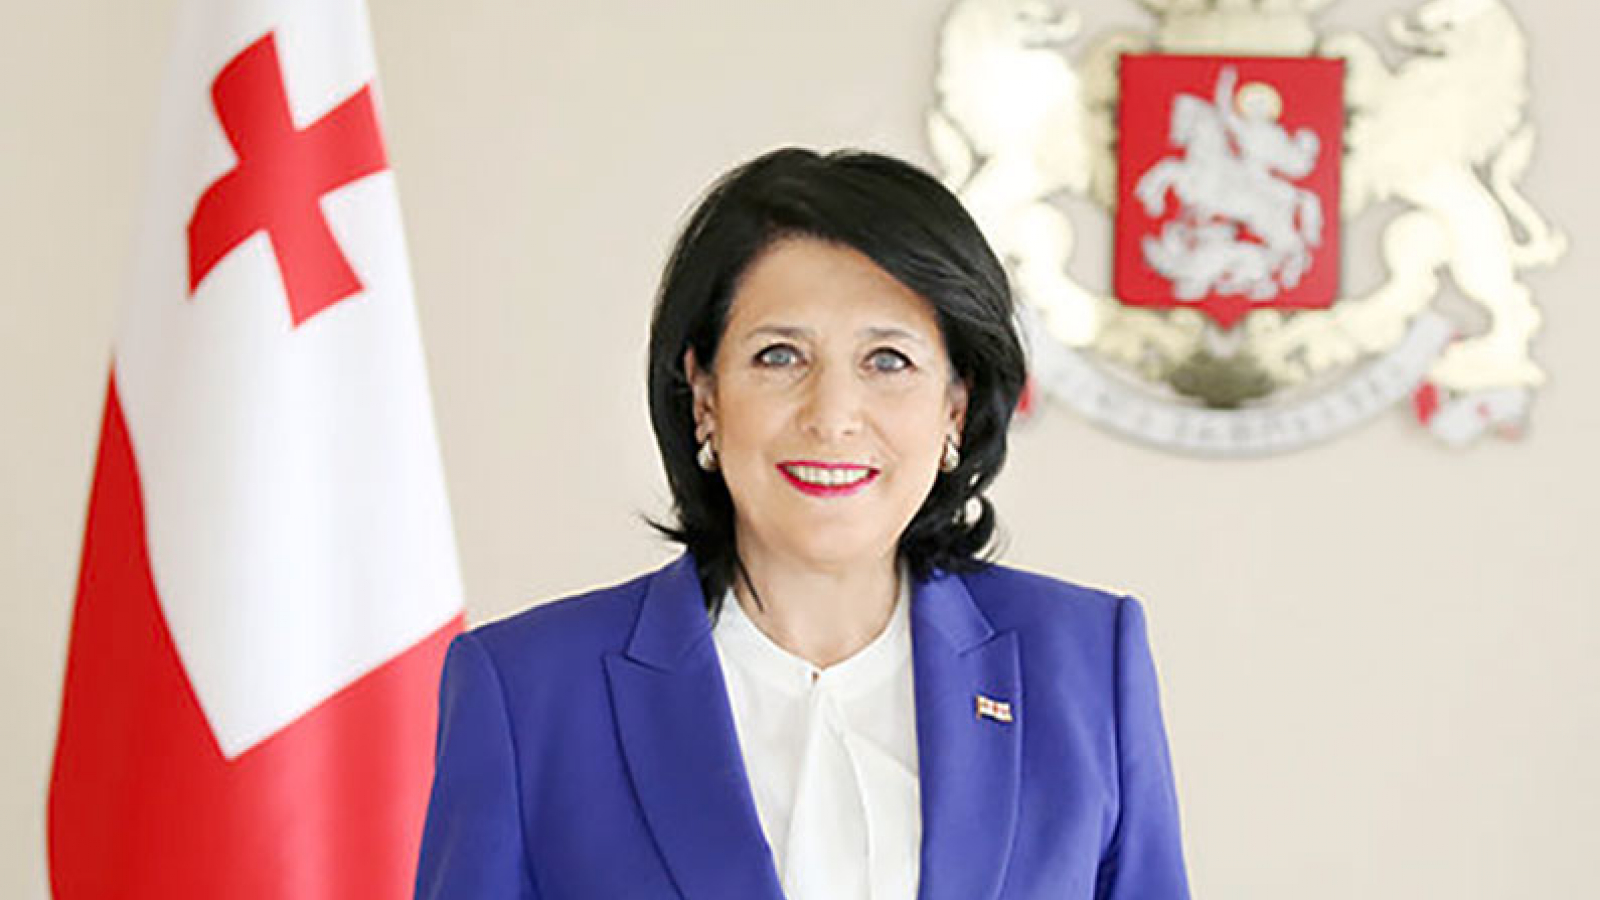 President of Georgia joins Global Commission for Urgent Action on Energy Efficiency